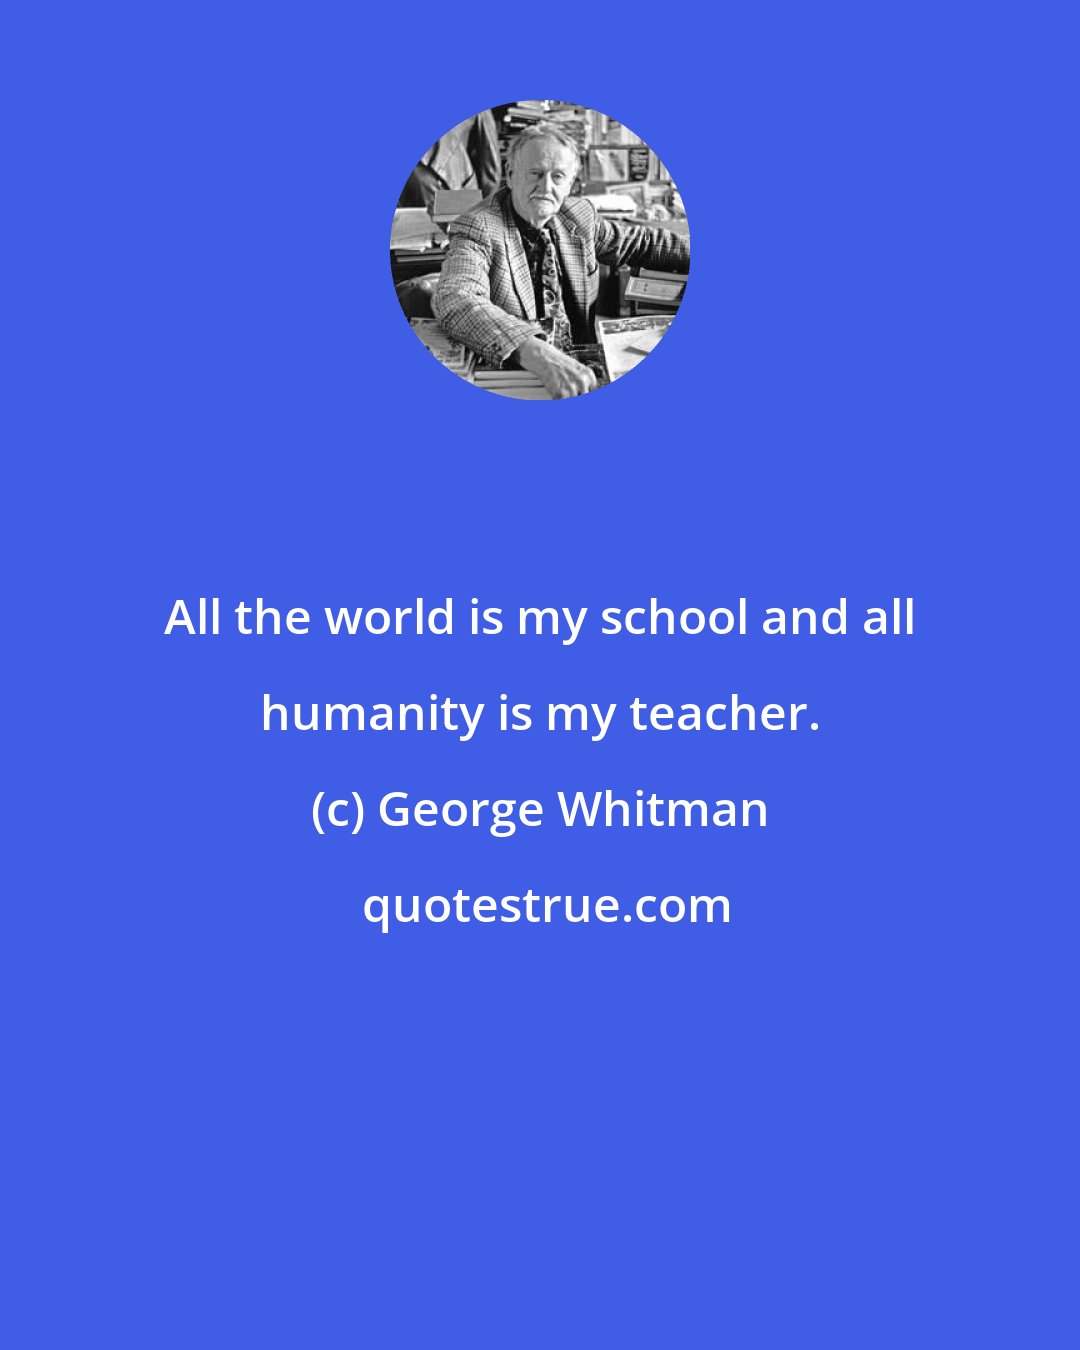 George Whitman: All the world is my school and all humanity is my teacher.